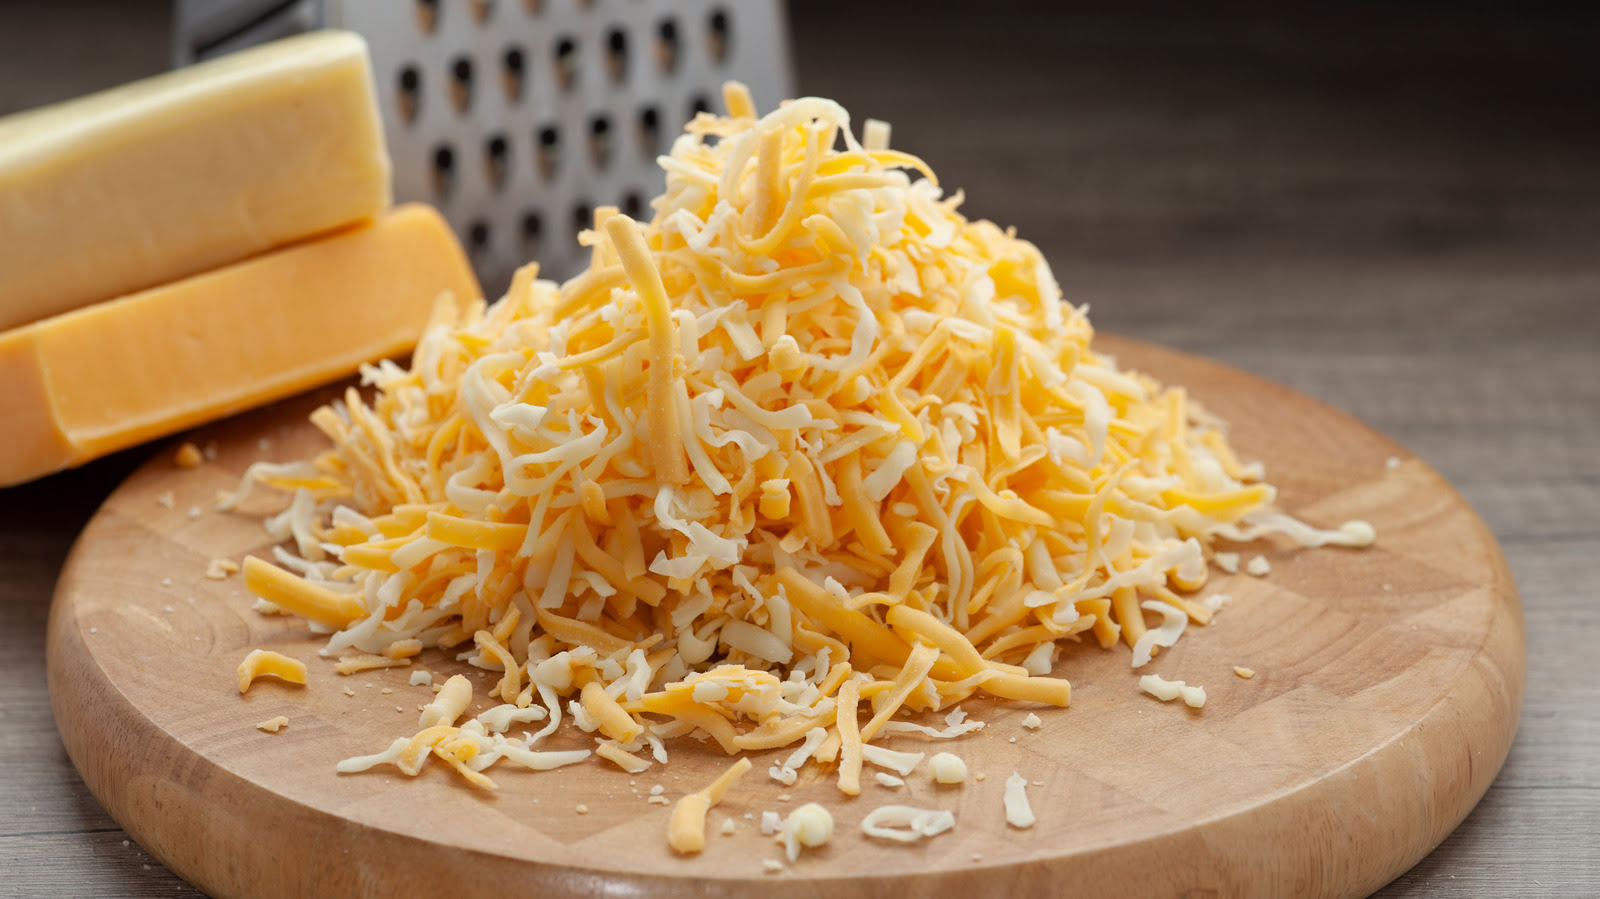 How To Store Freshly Grated Cheese